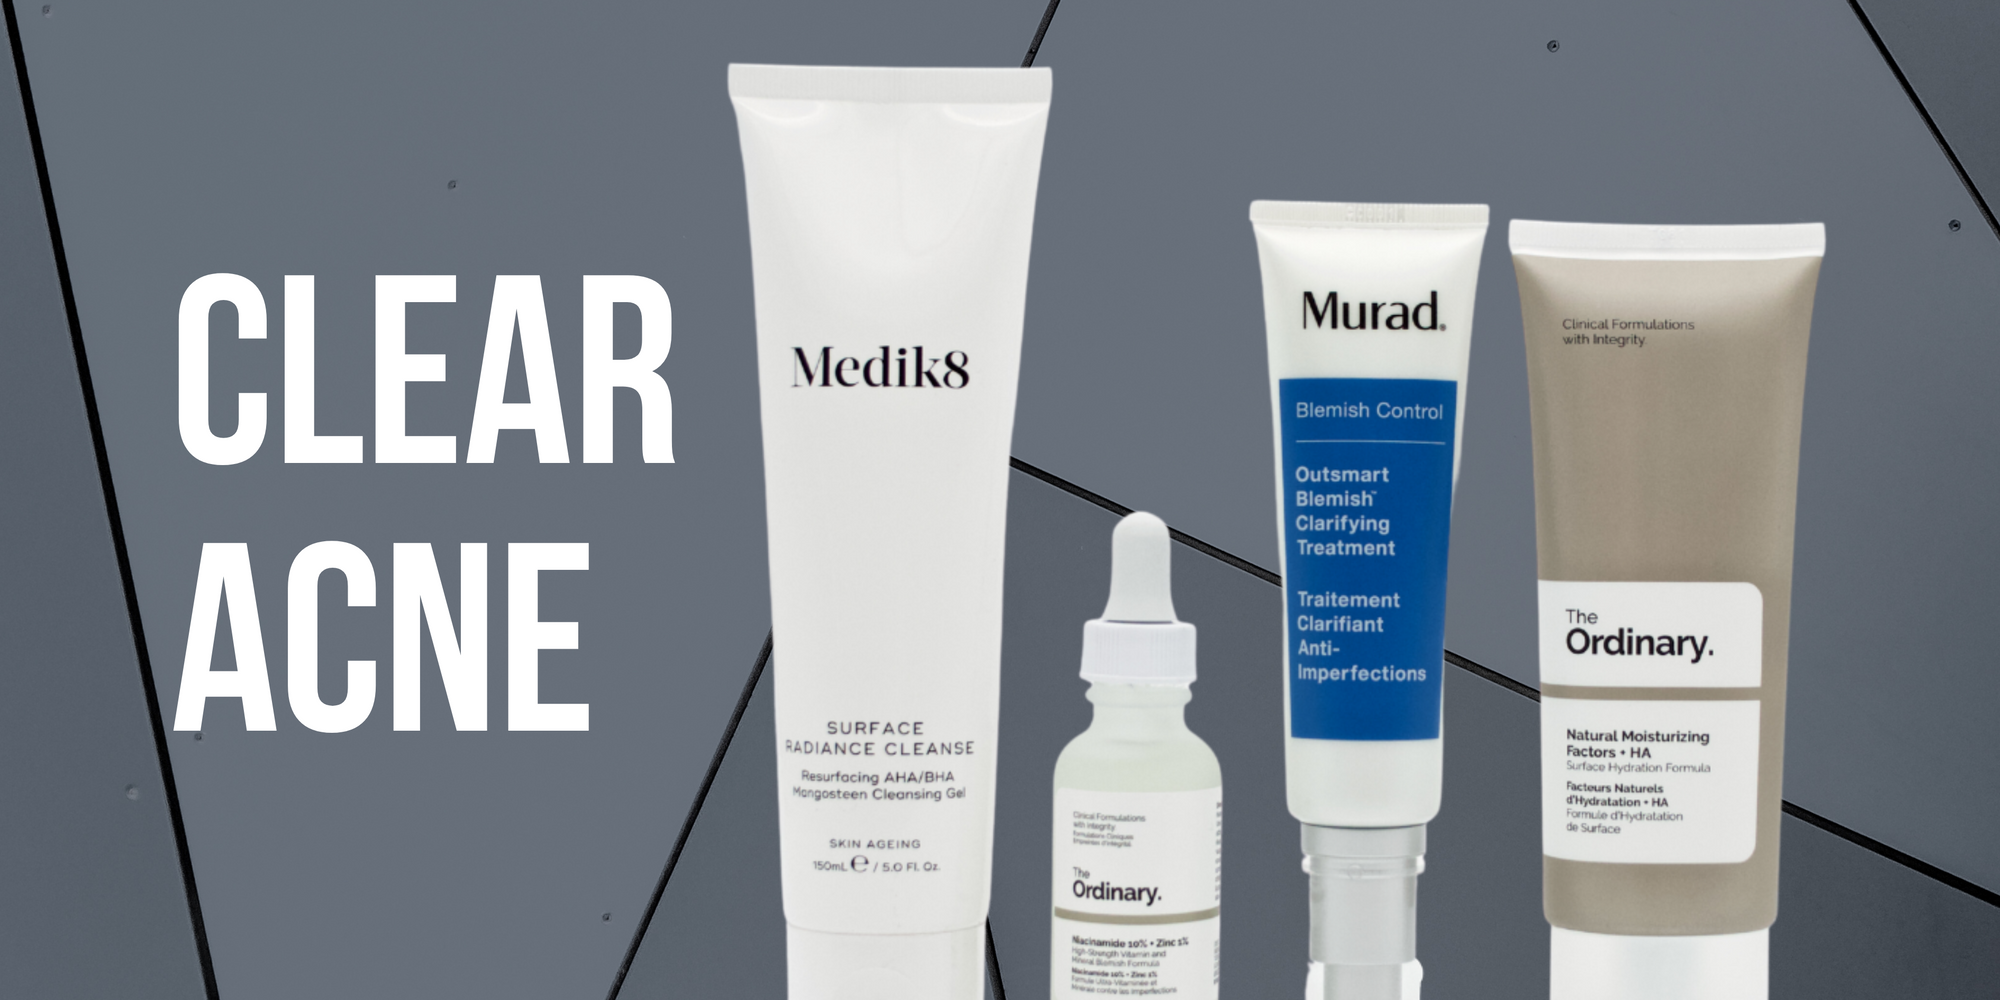 Acne Clearing Solutions - Science backed, Evidence Based. Simple Routines, iS Clinical, The Ordinary, Murad Skincare, Medik8, Jaxon Lane Shake & Wake